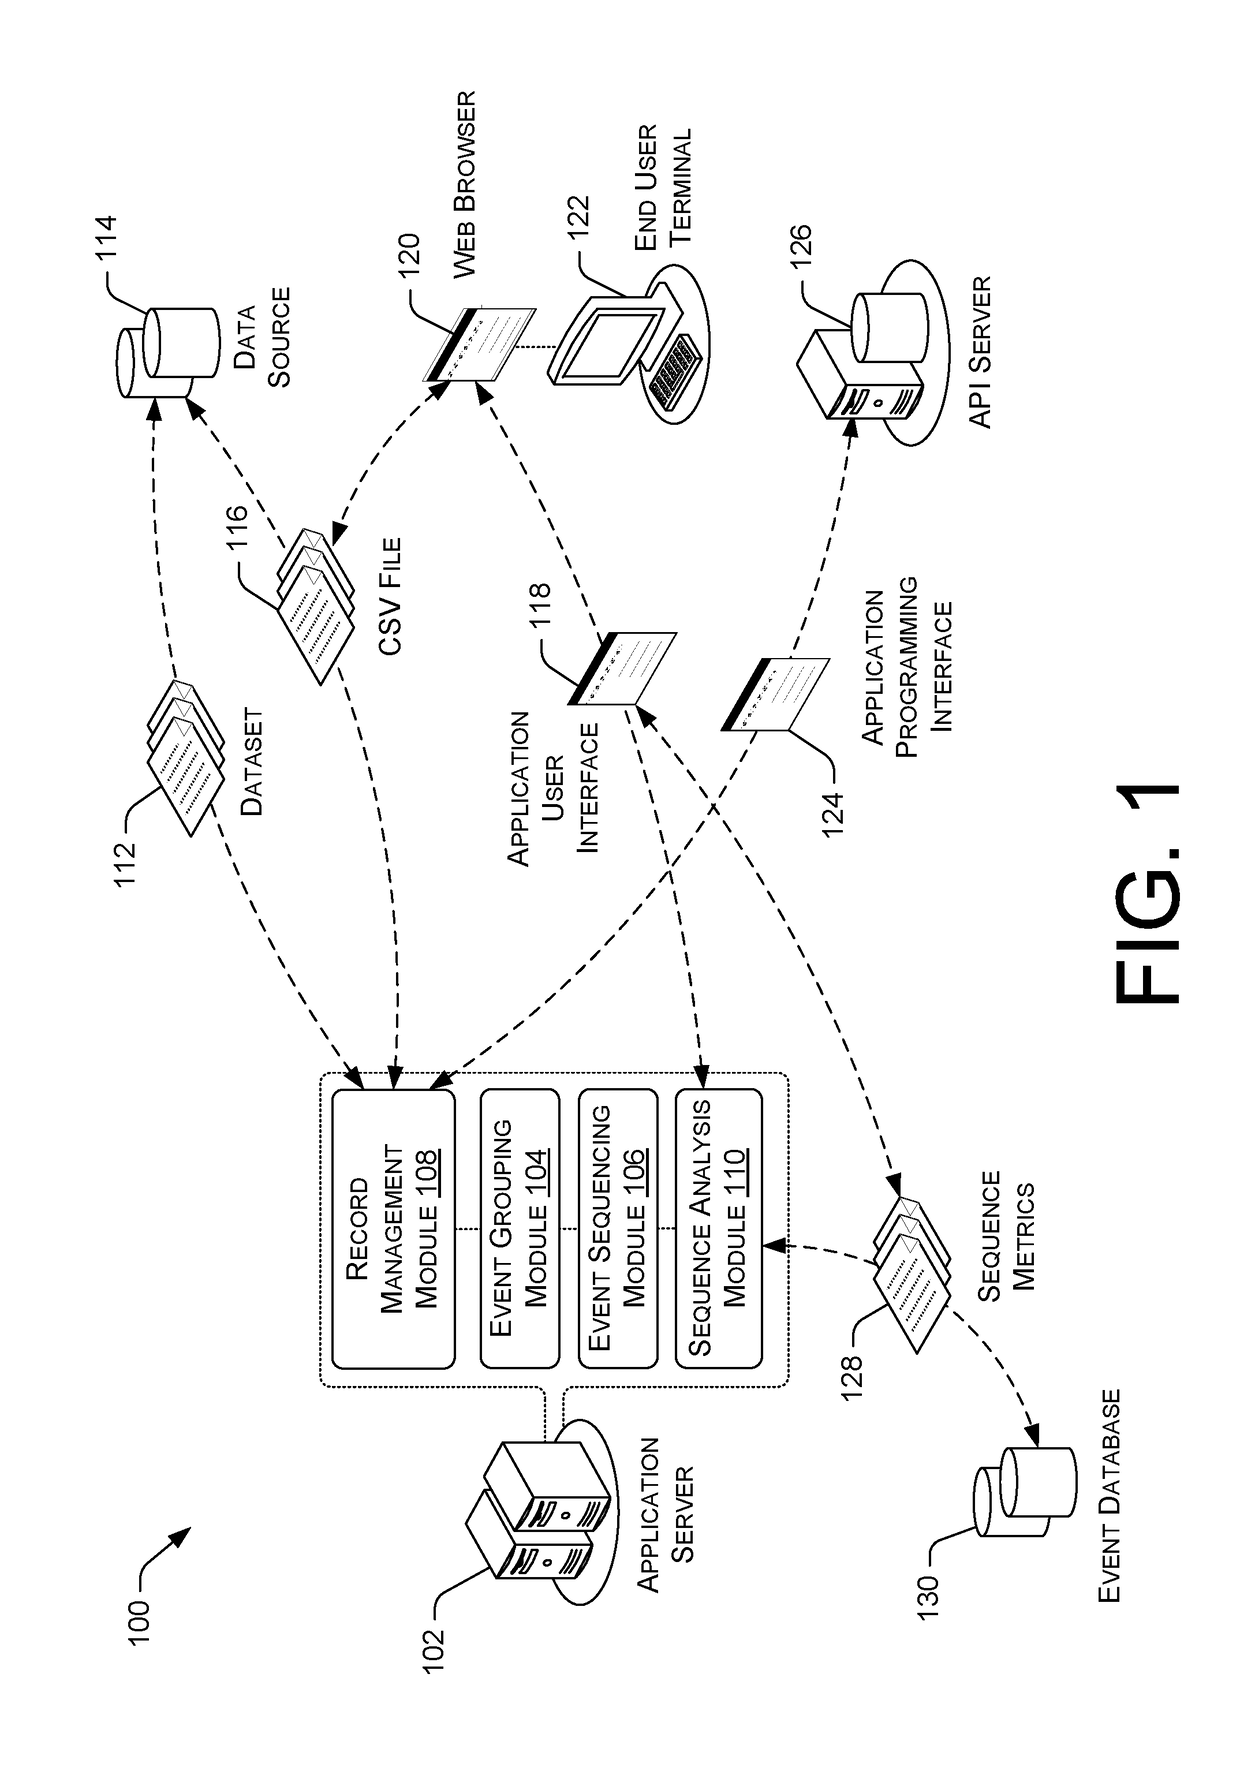 System and Method for Visual Analysis of Event Sequences